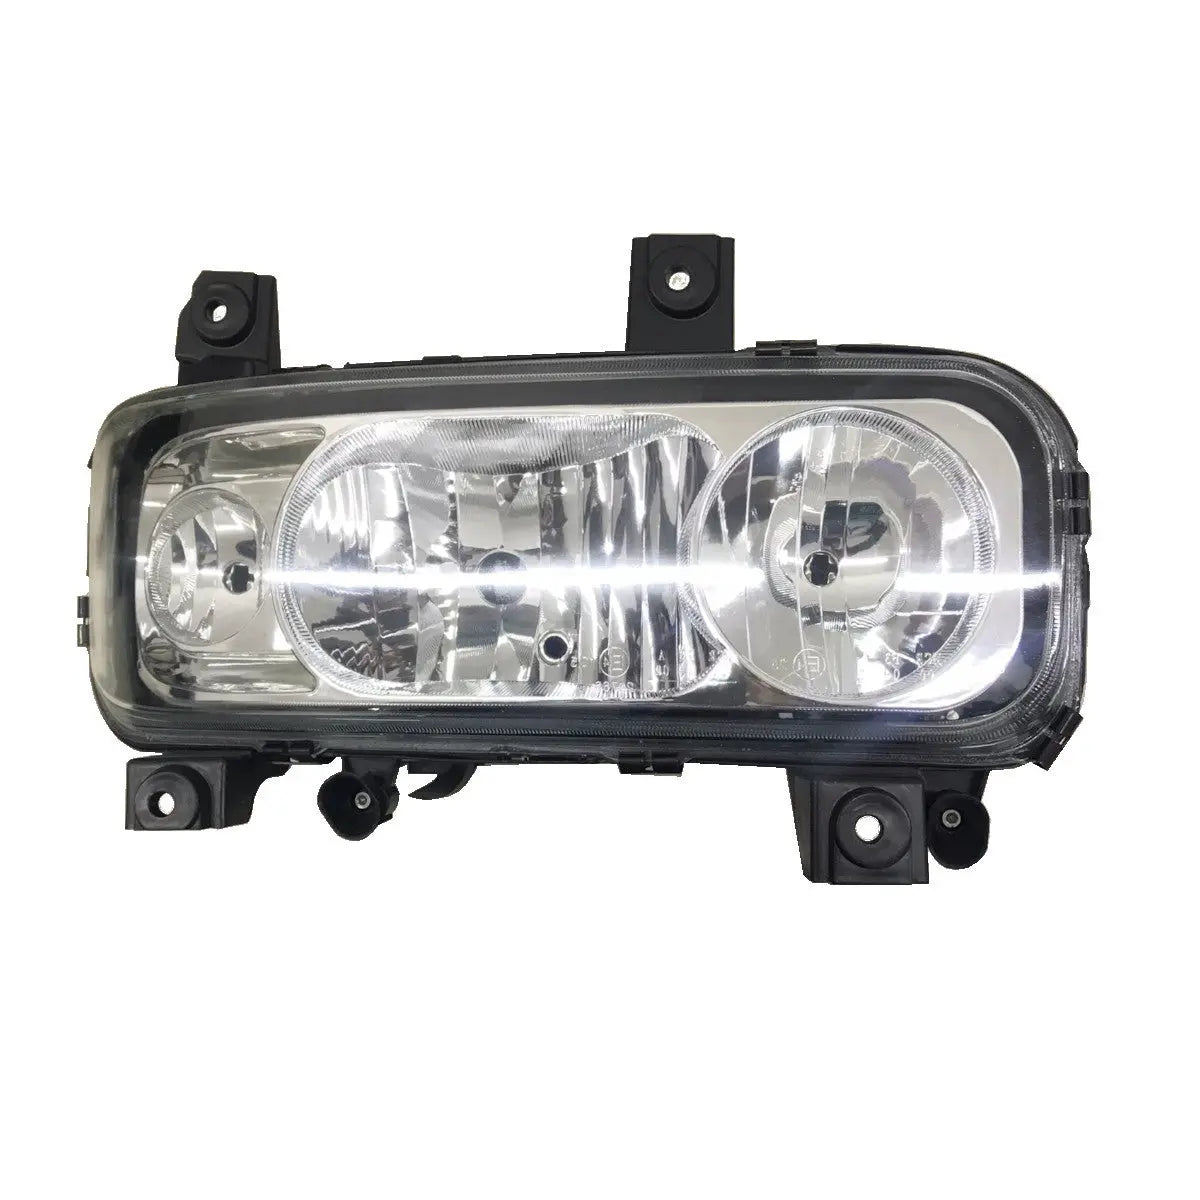 CHINA Factory Wholesale 9738202361 9738202561S A9738202361 A9738202561S Head Lamp For MERCEDES BENZ FANCHANTS China Auto Parts Wholesales